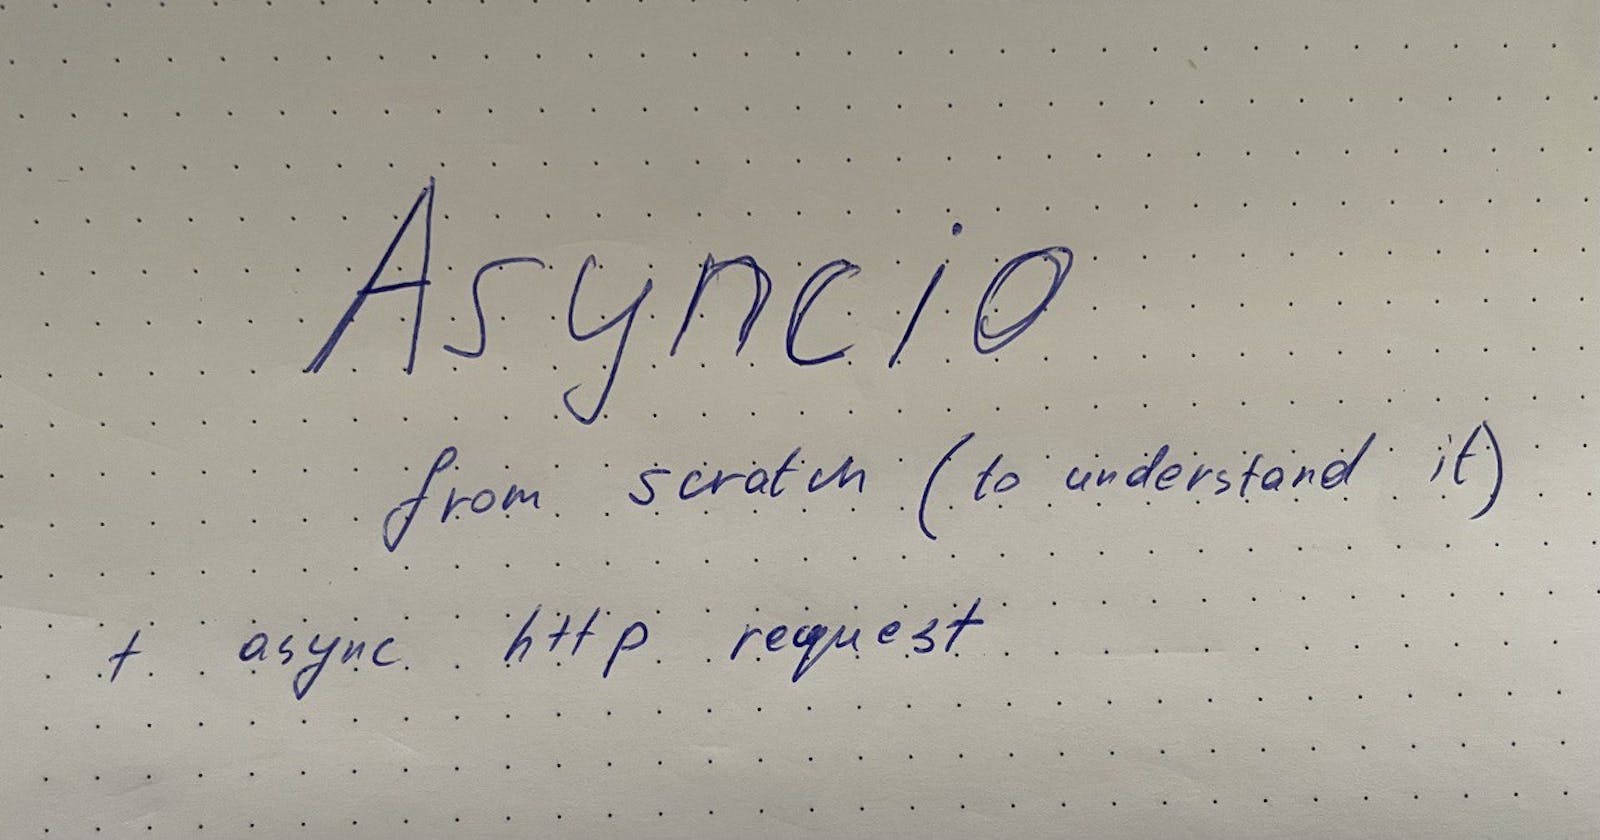 Building python asyncio from scratch (to understand it)